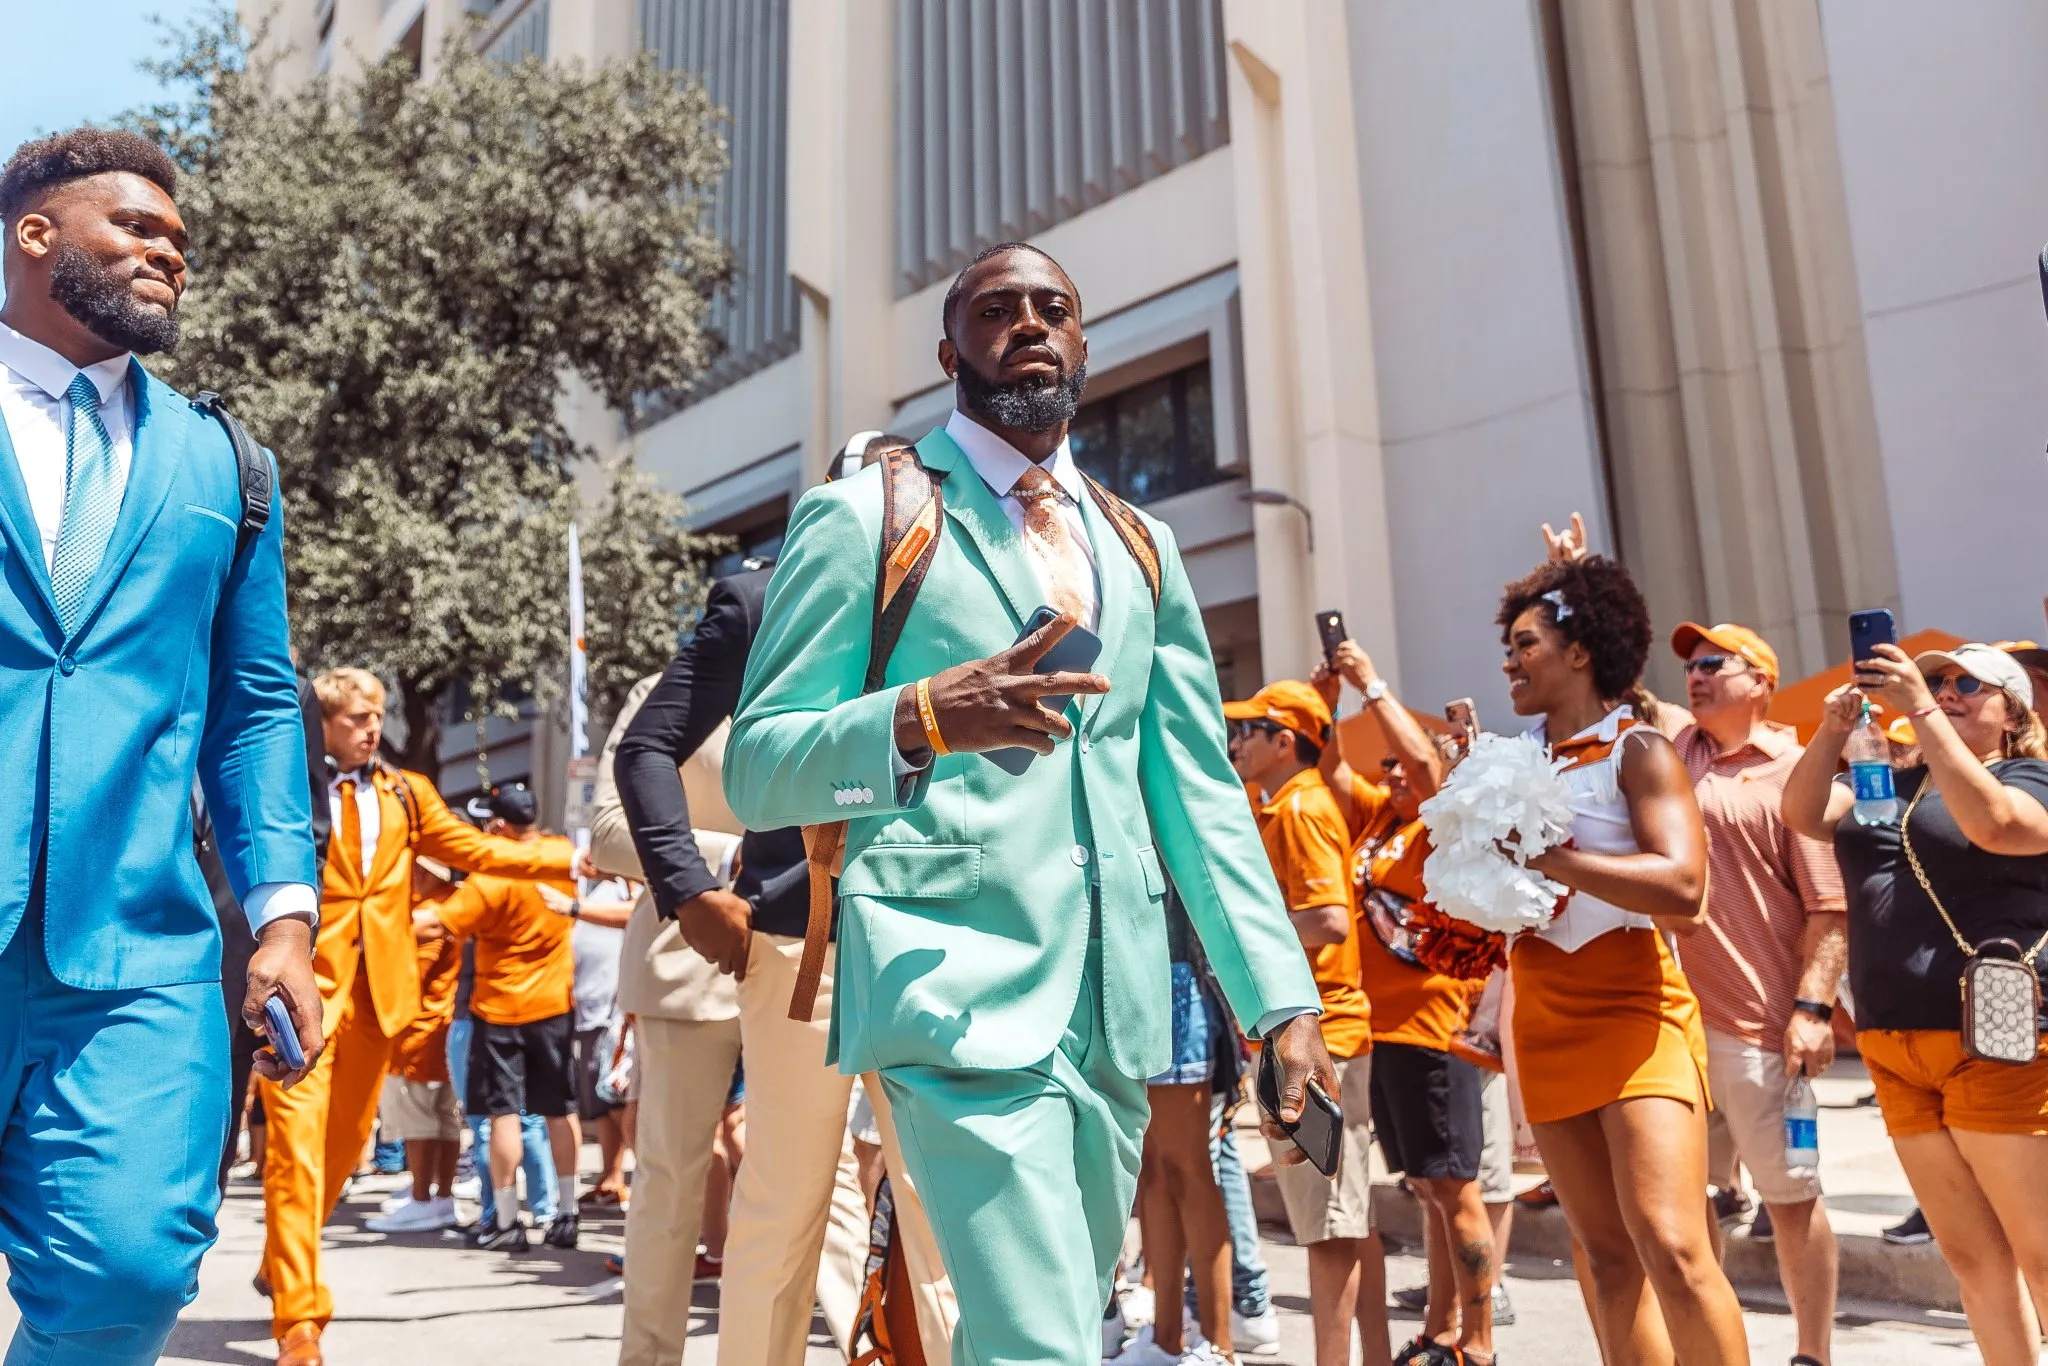 A group of sportsmen wearing different colors of suits walking in a parade